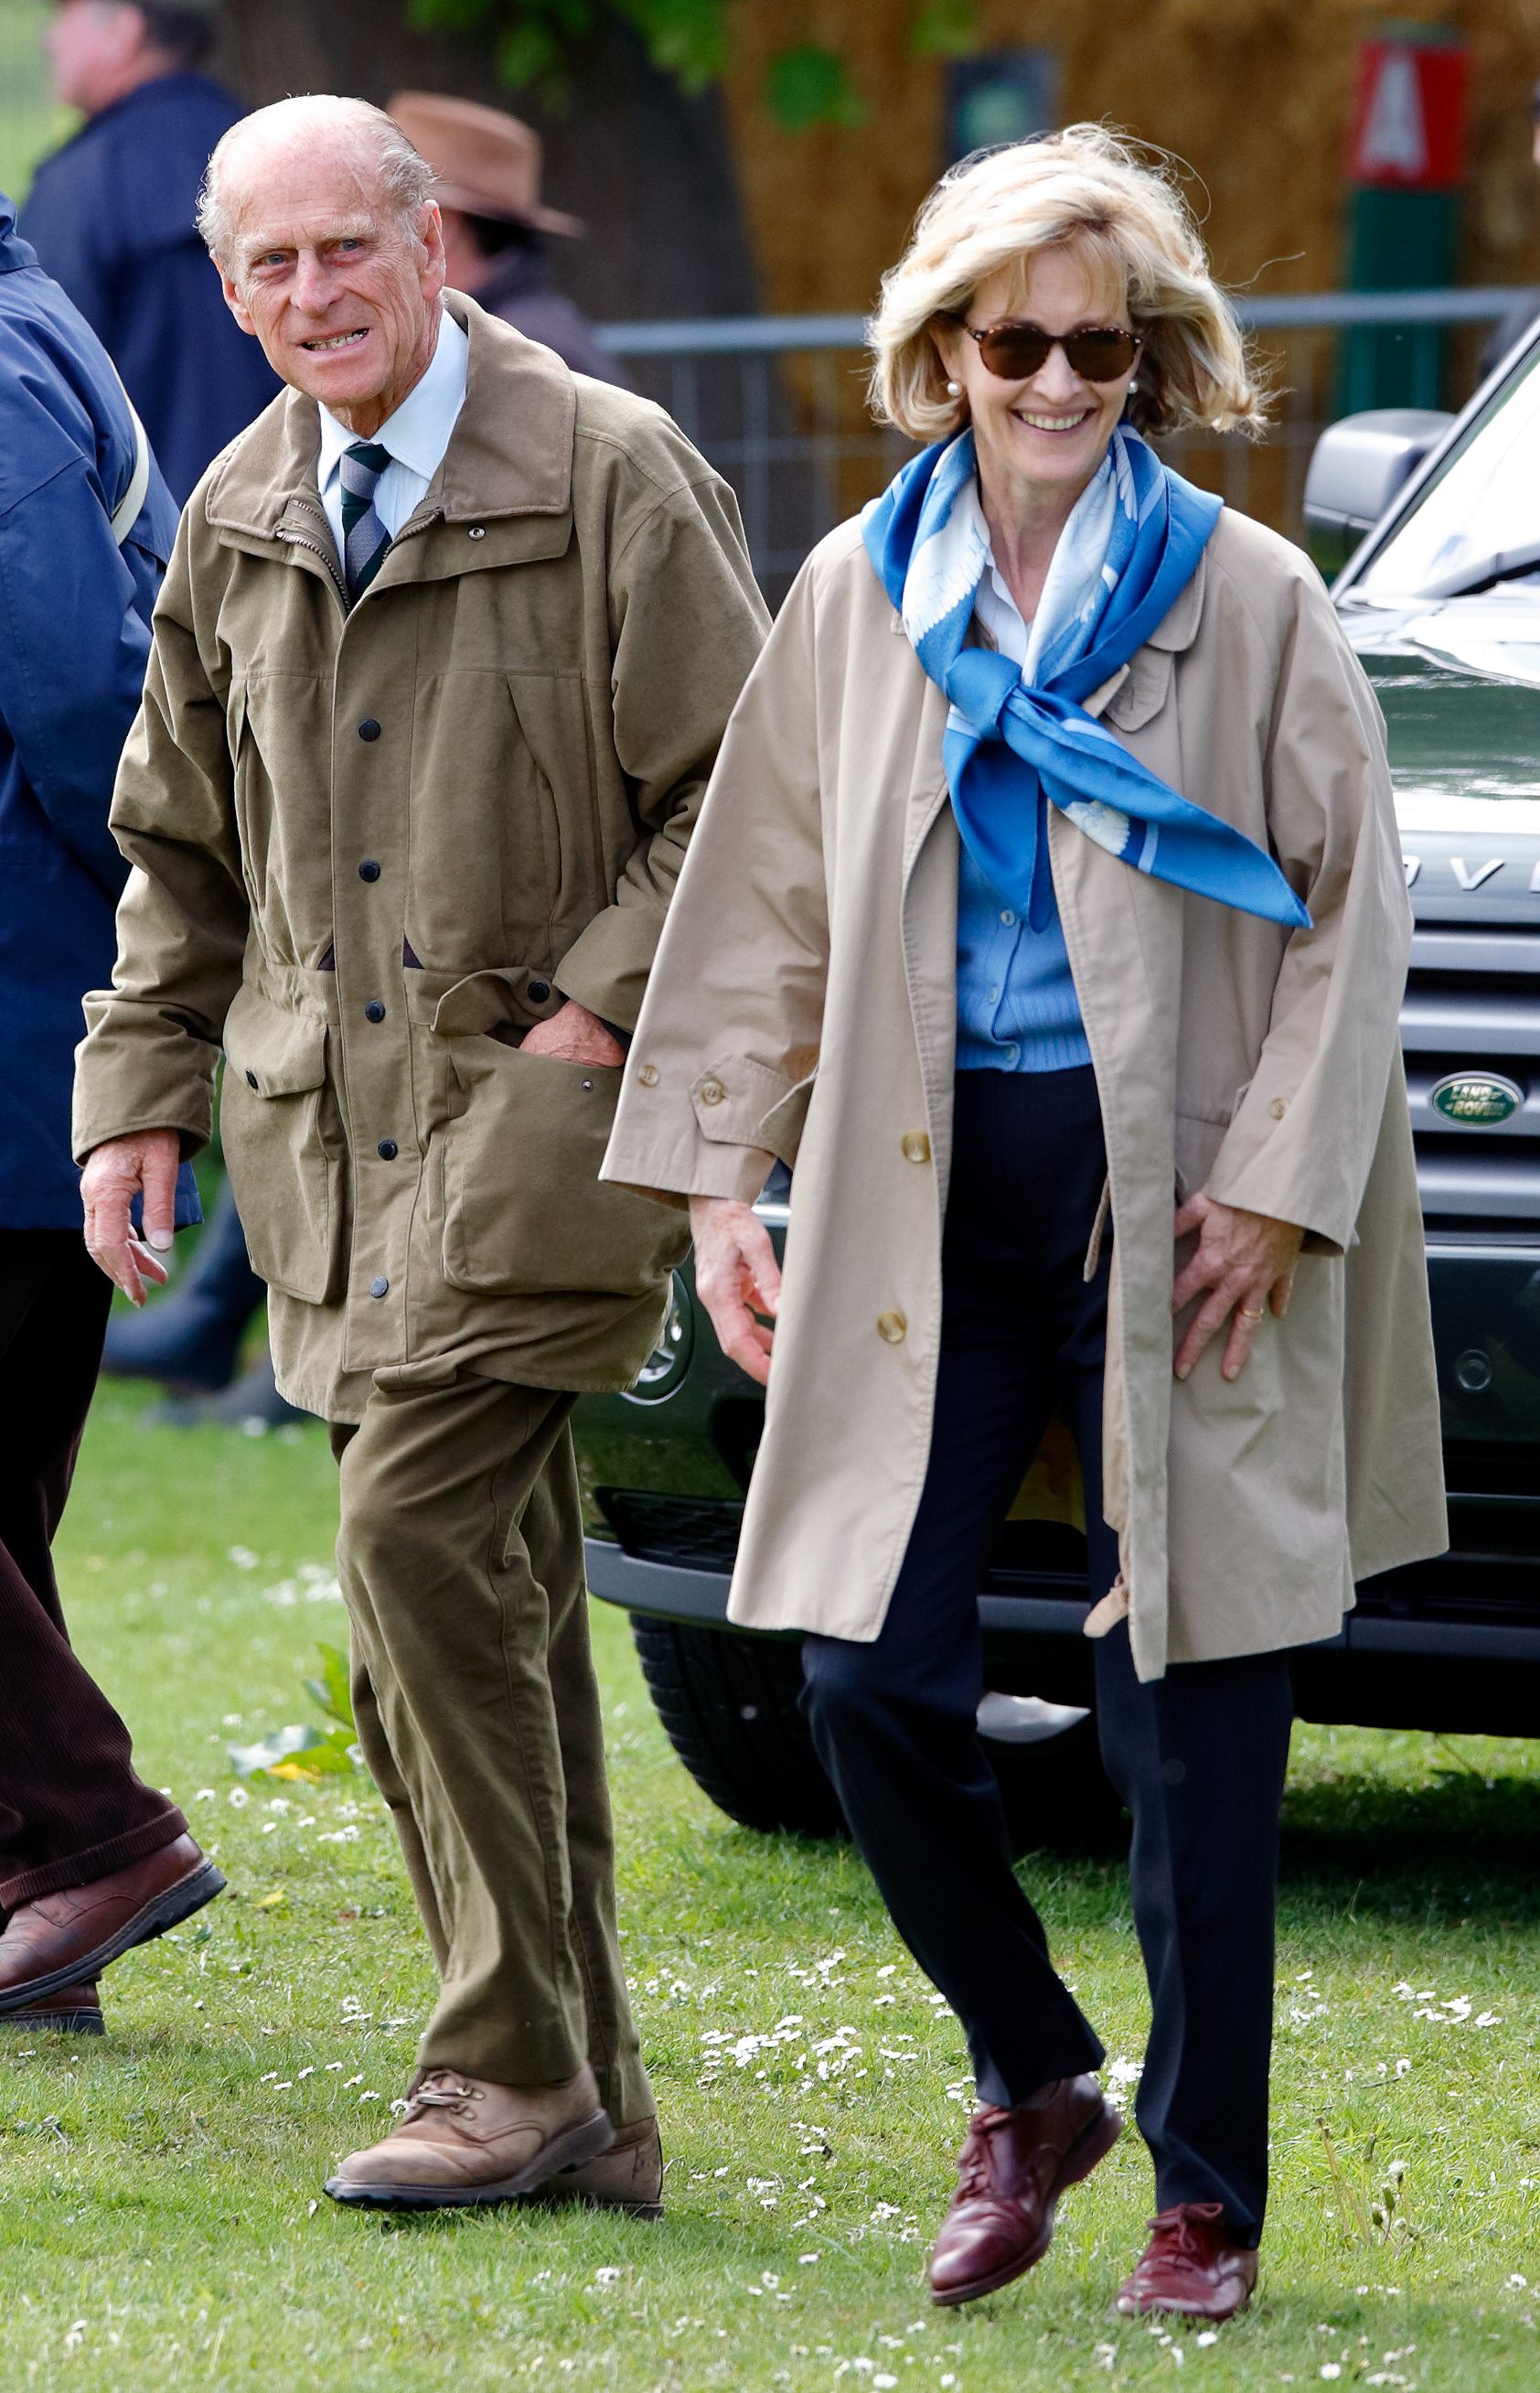 Prince Philip and Penelope Knatchbull, Lady Brabourne at day 3 of the Royal Windsor Horse Show in Home Park on May 12, 2007 | Photo: Getty Images